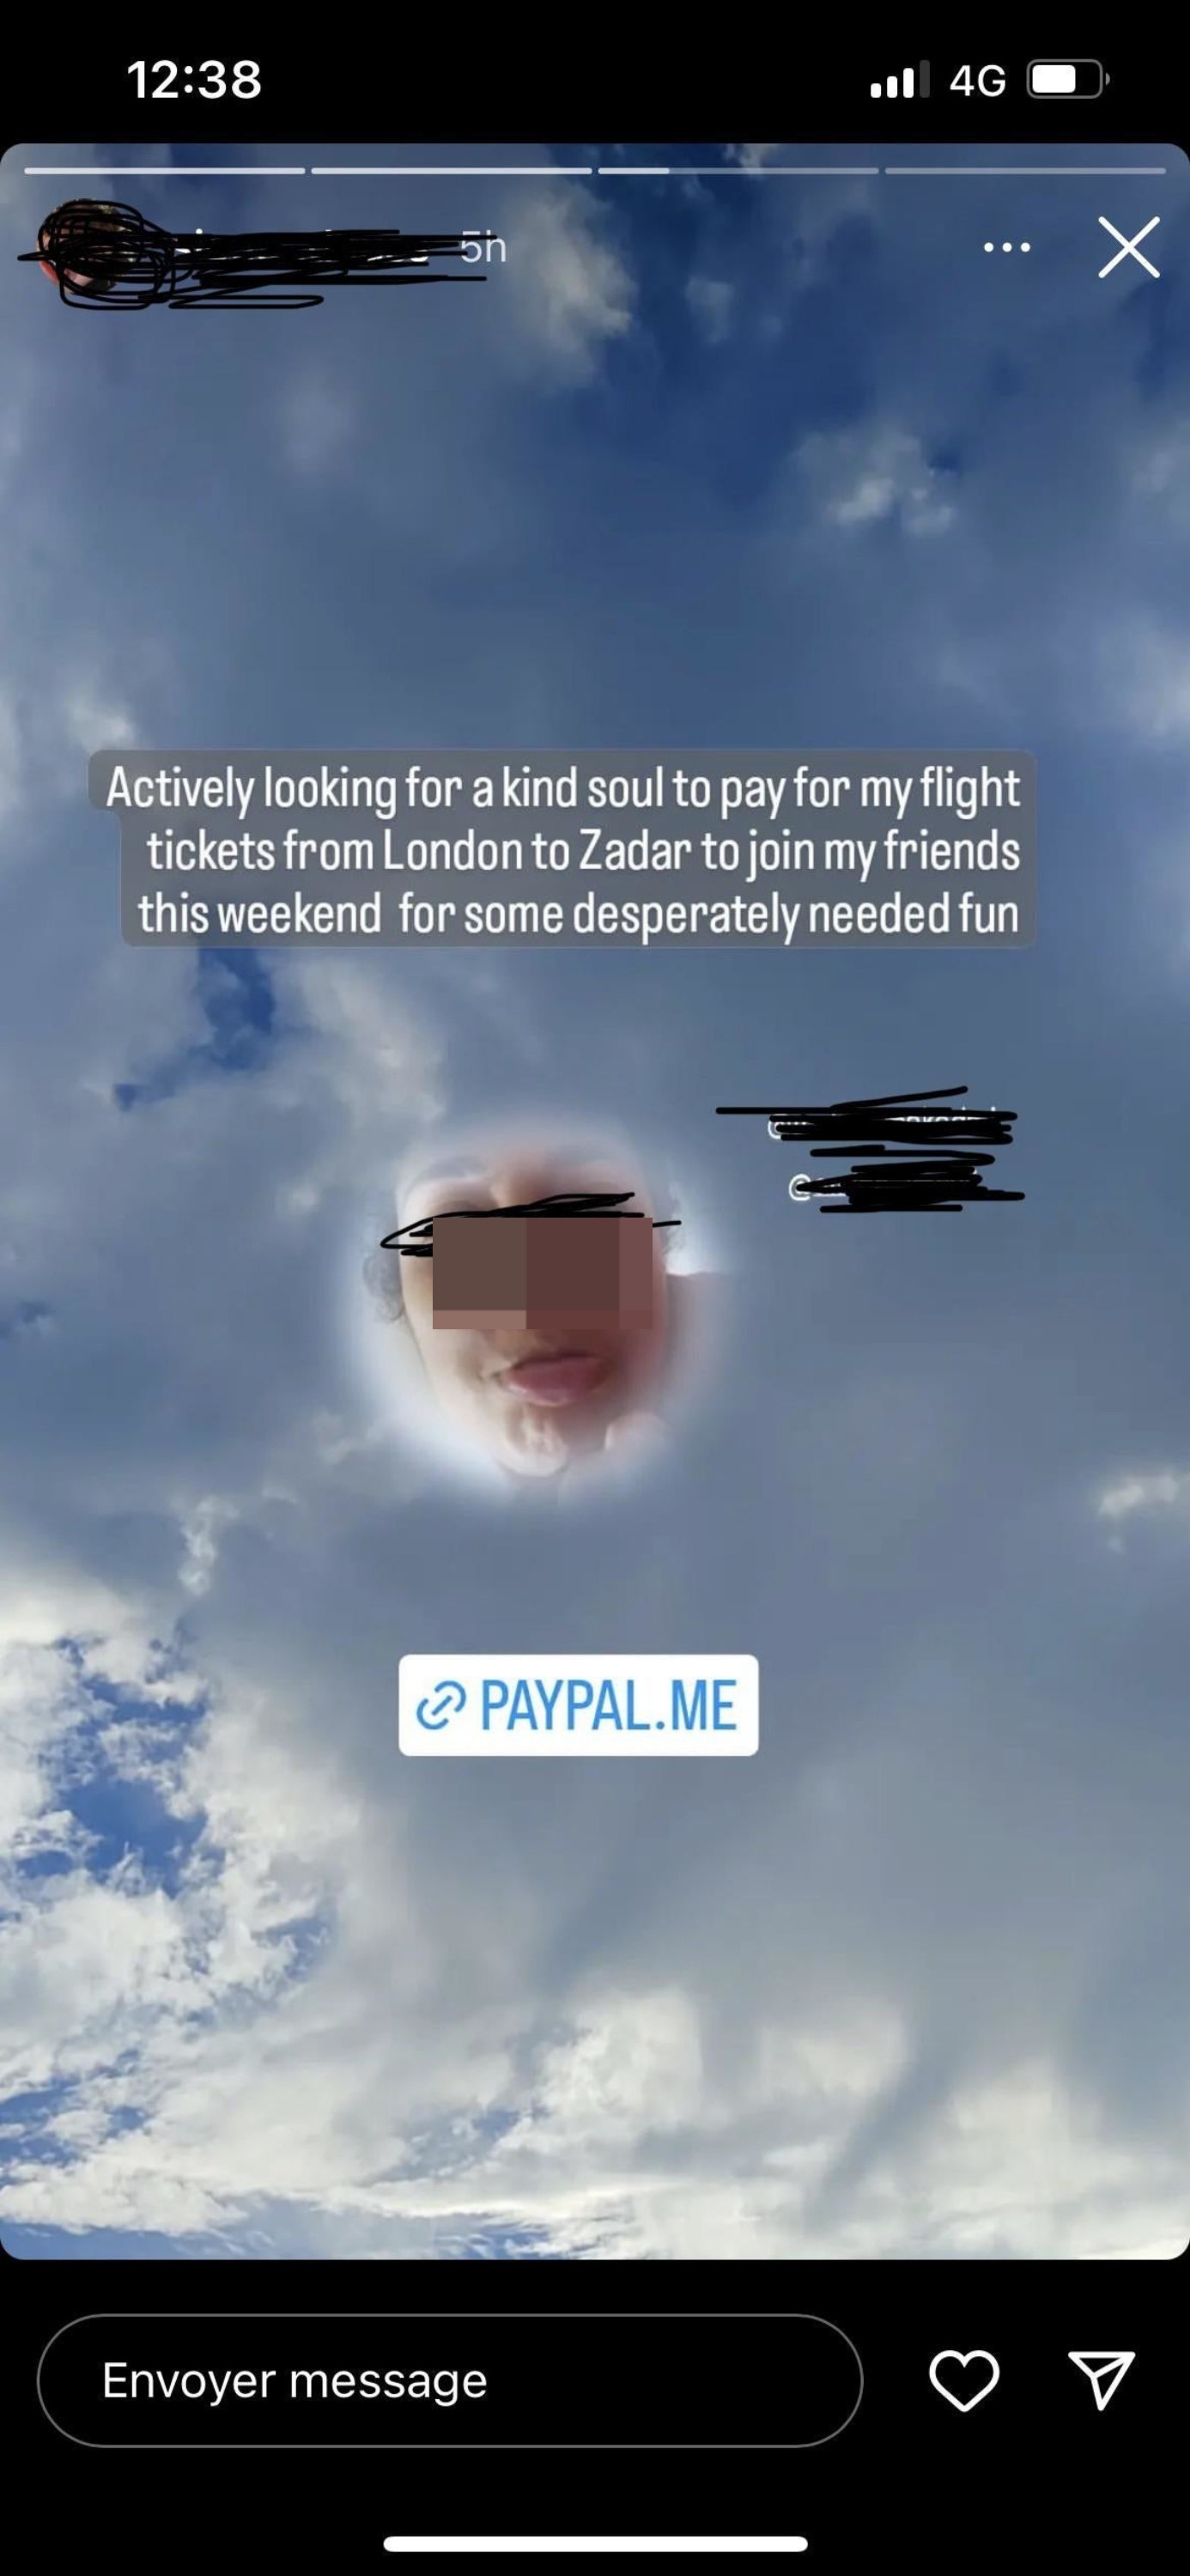 Someone asking for someone to buy them plane tickets so they can vacation with their friends